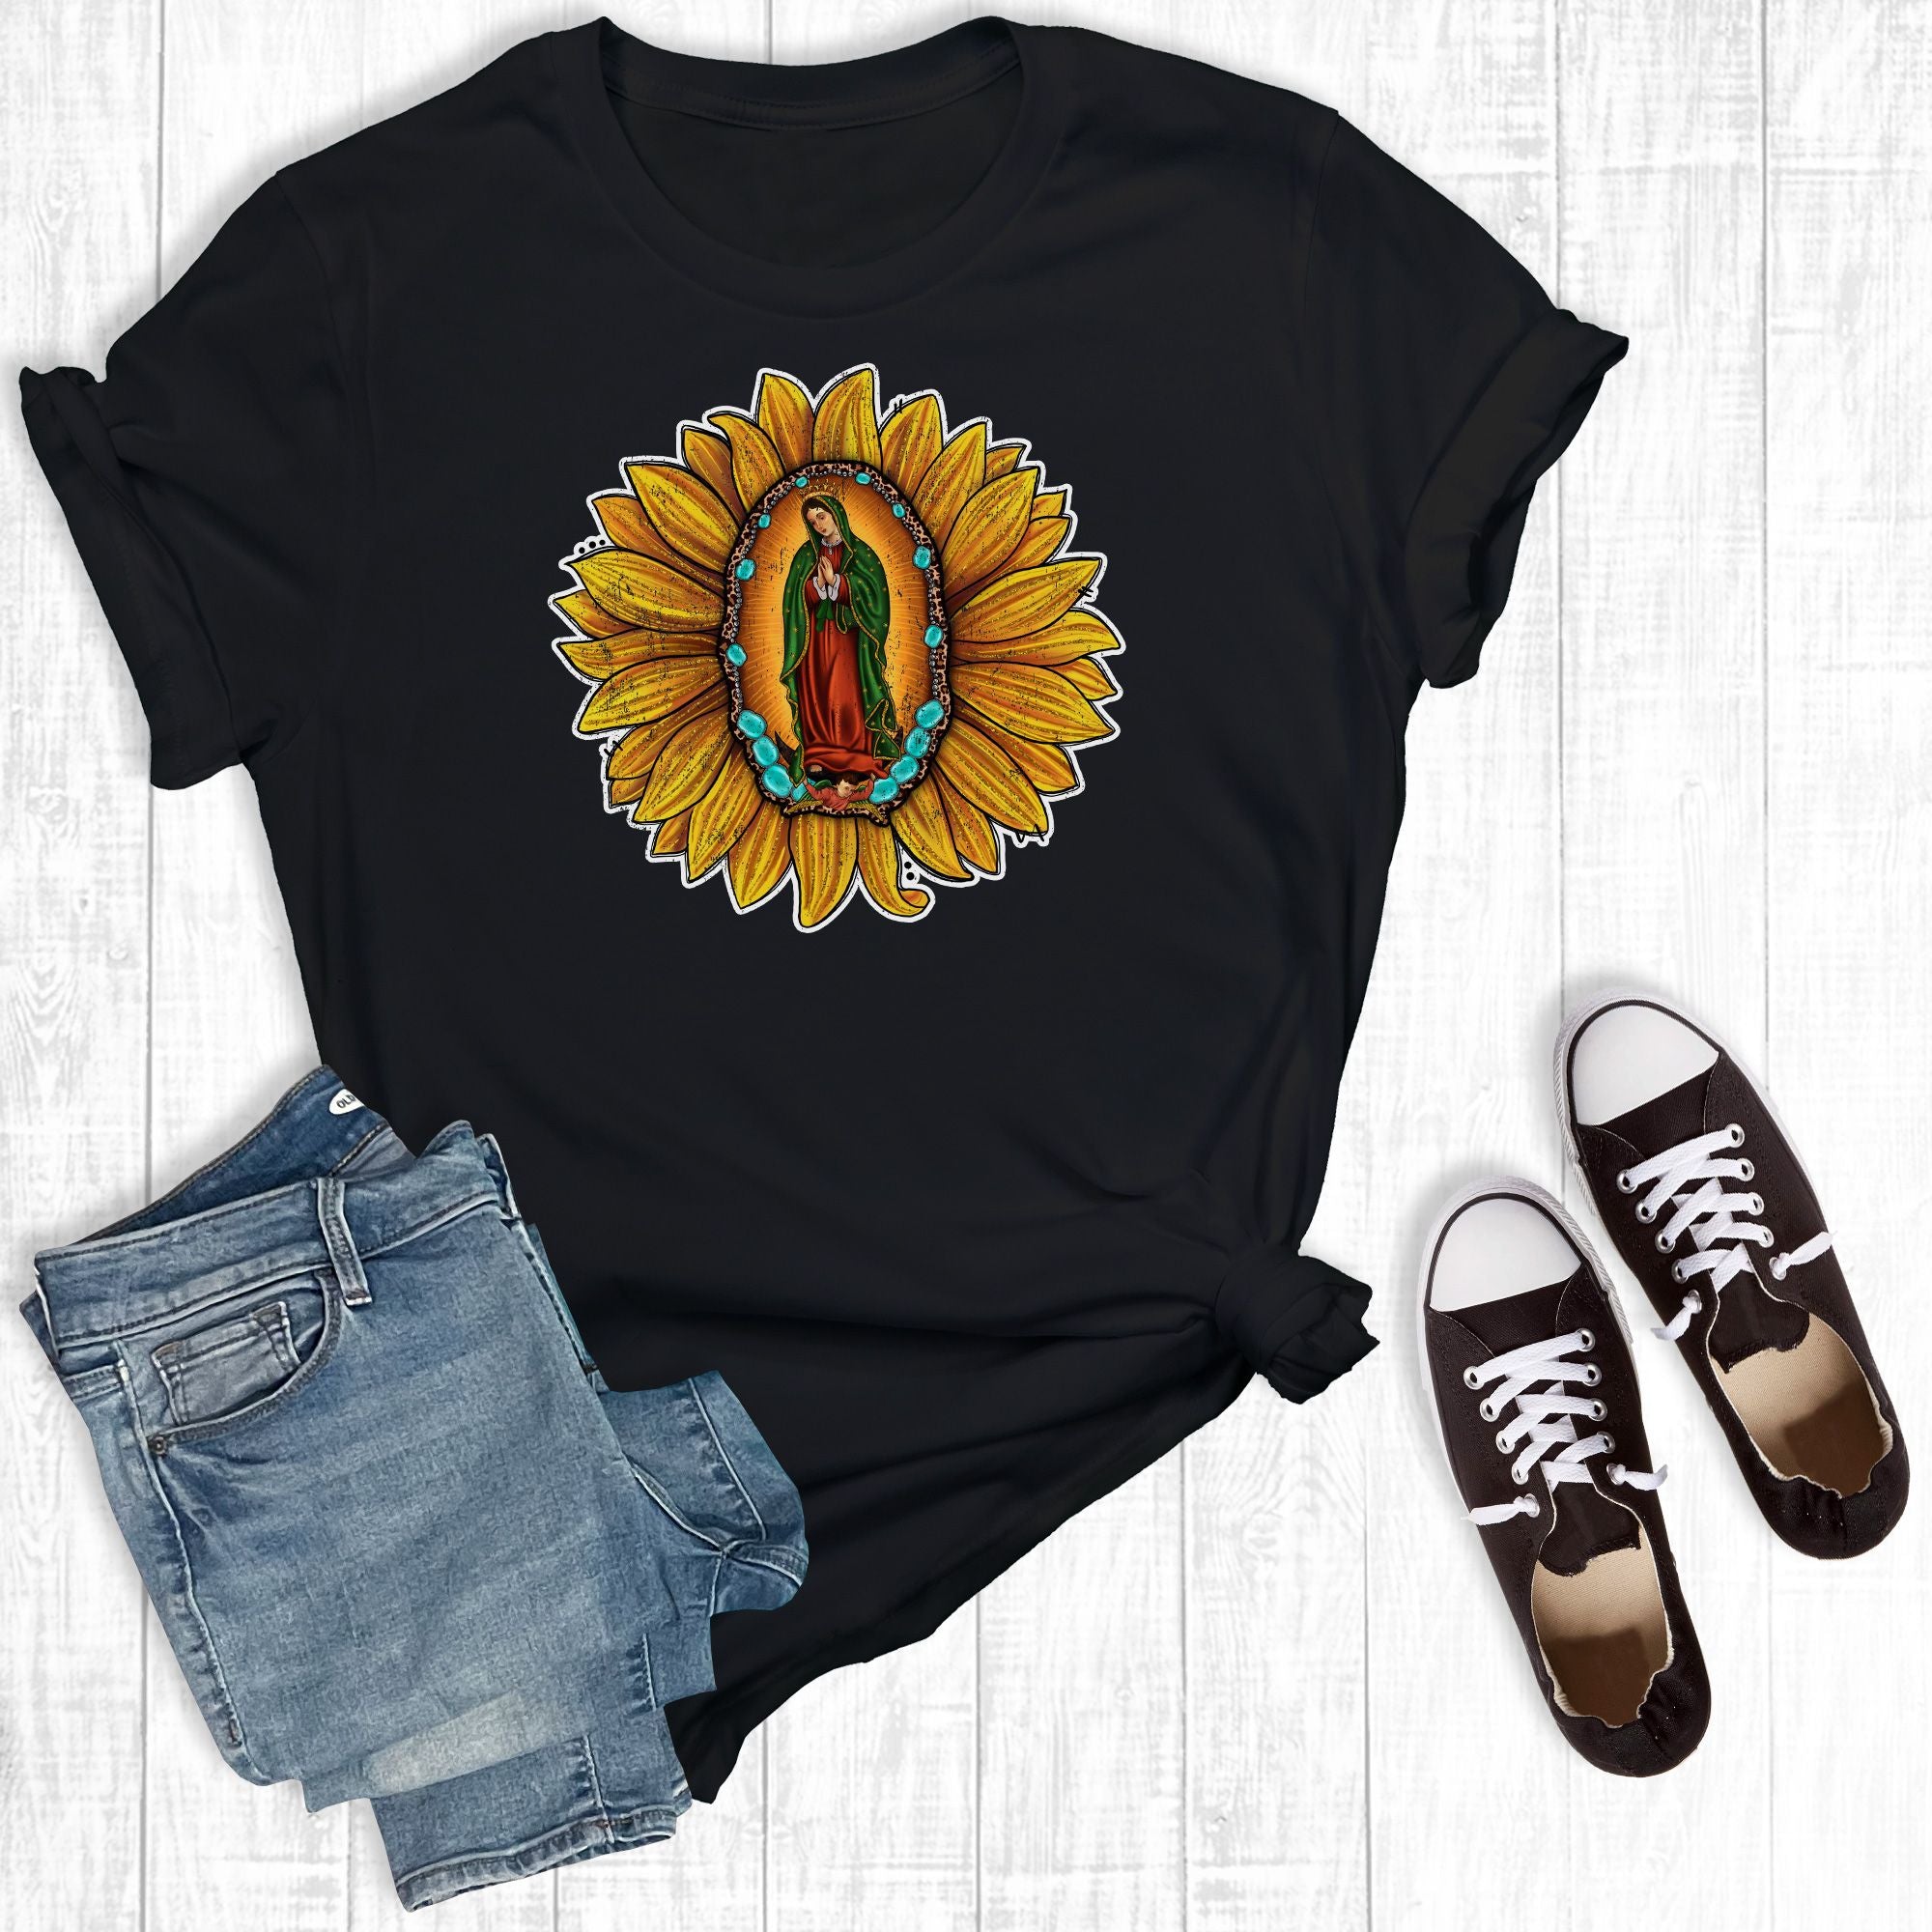 Our Lady Sunflower Black